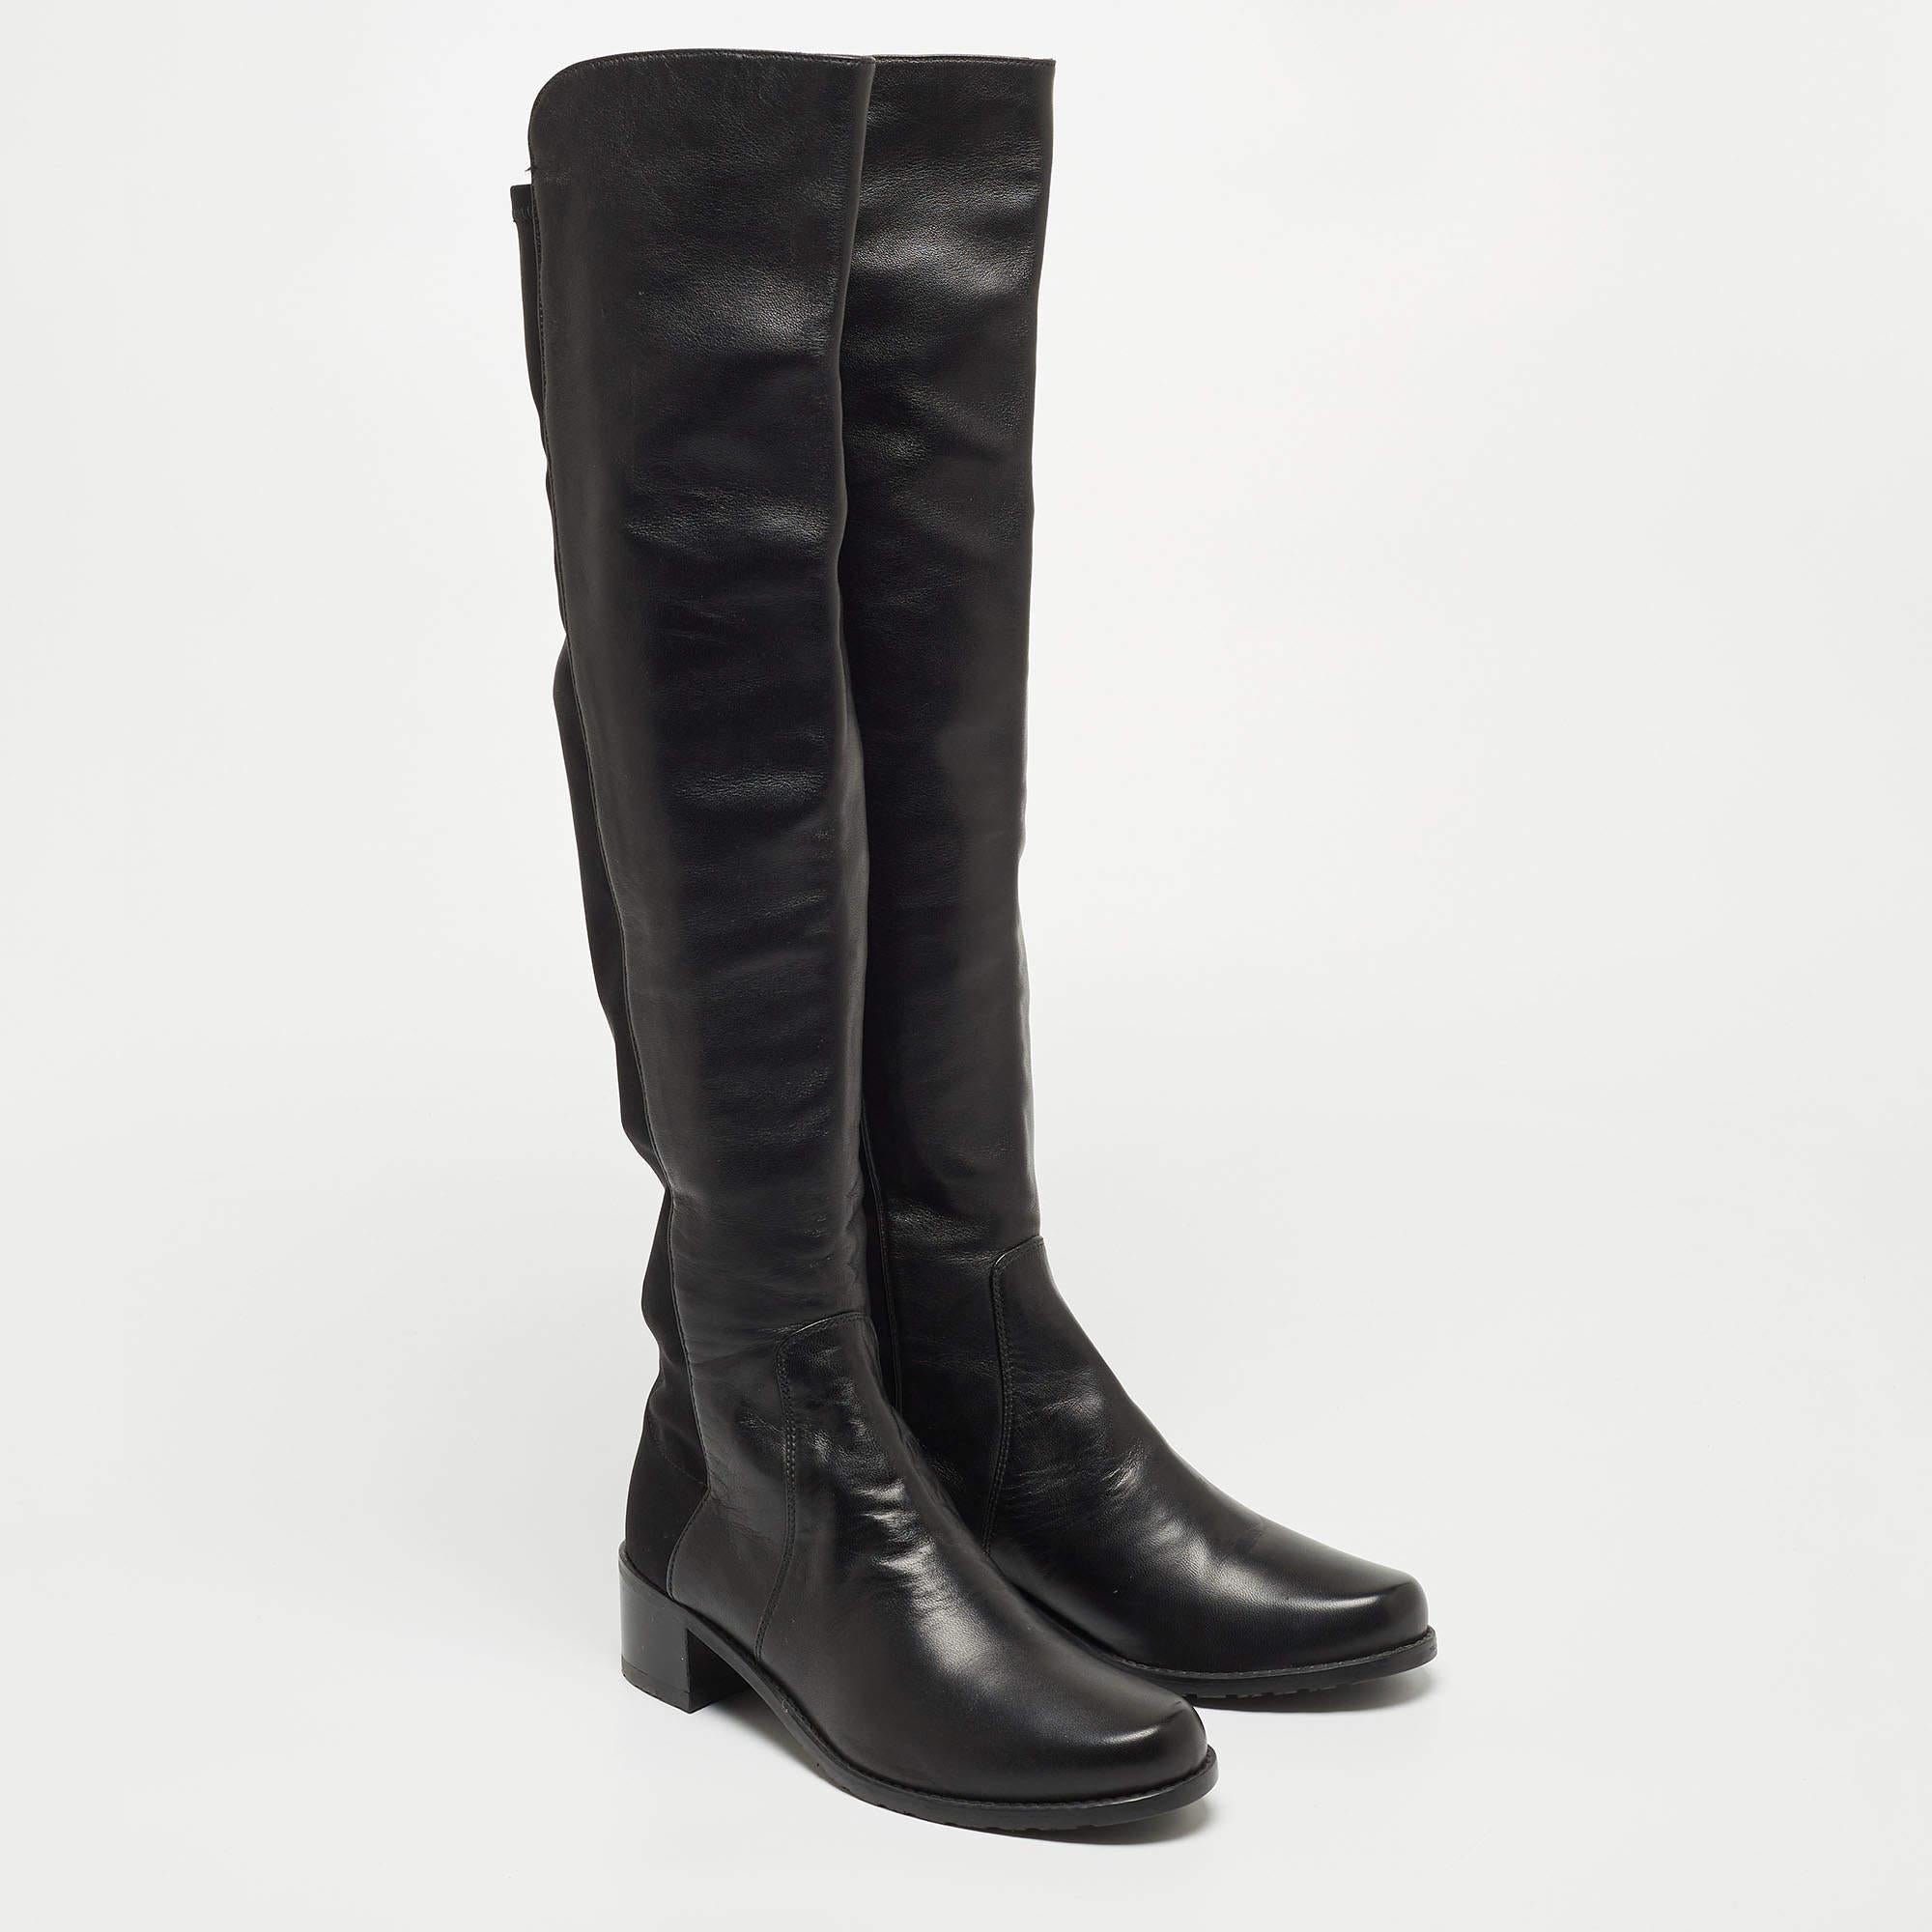 Women's Stuart Weitzman Black Leather and Fabric Thigh High Boot Size 35